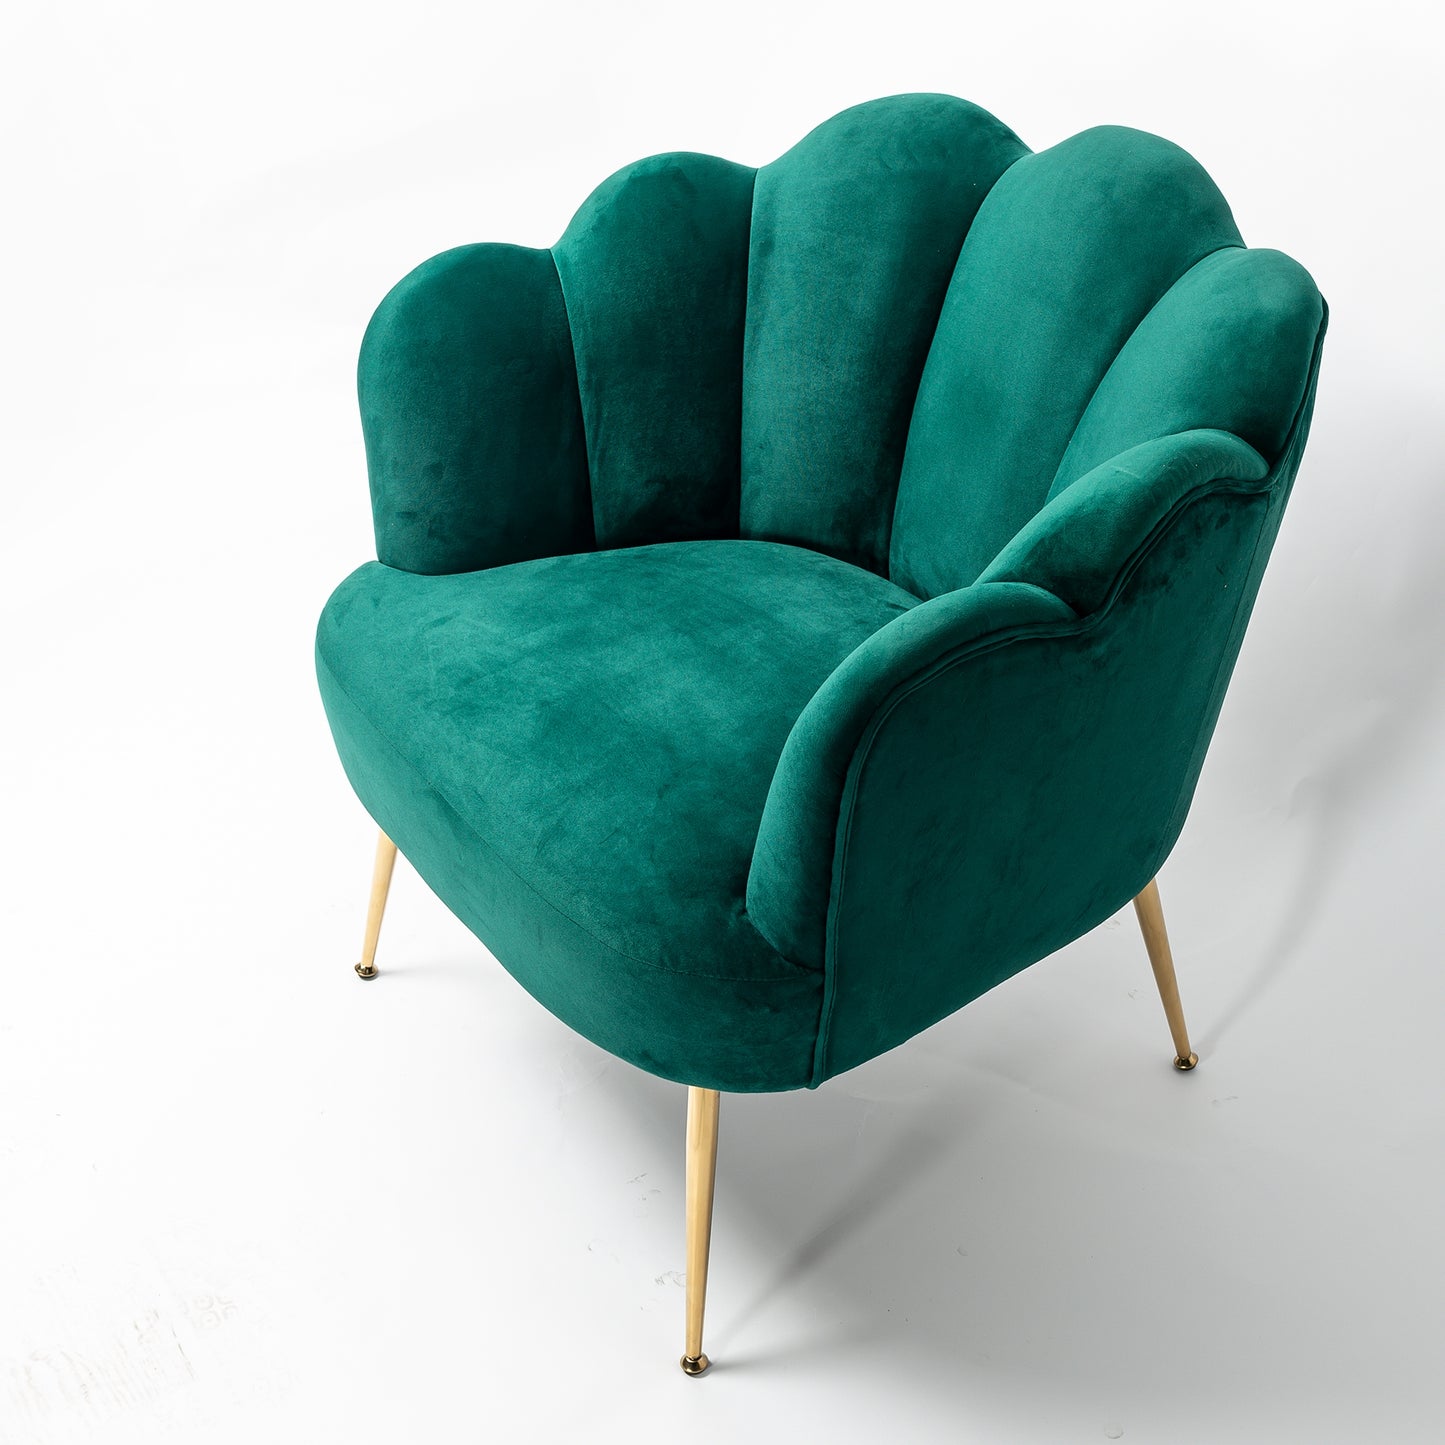 Emerald Green Velvet Lotus Cocktail Chair with Gold Legs